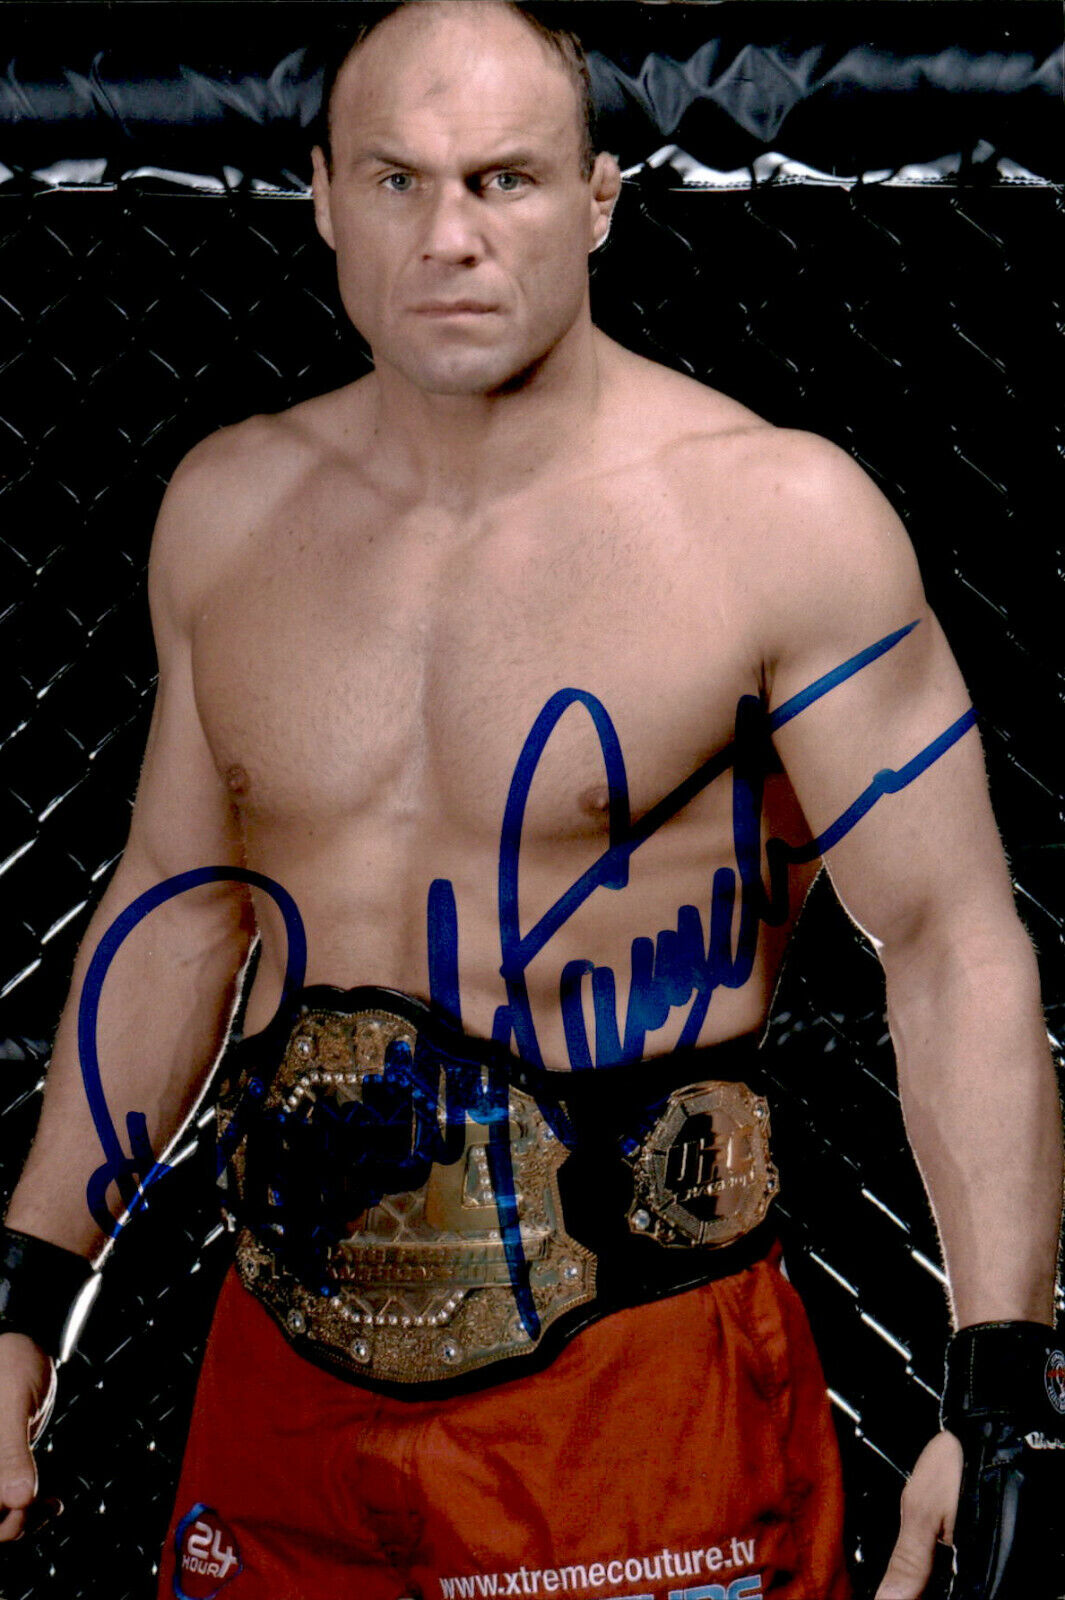 Randy Couture SIGNED autographed 4x6 Photo Poster painting UFC ULTIMATE FIGHTING CHAMPIONSHIP #6